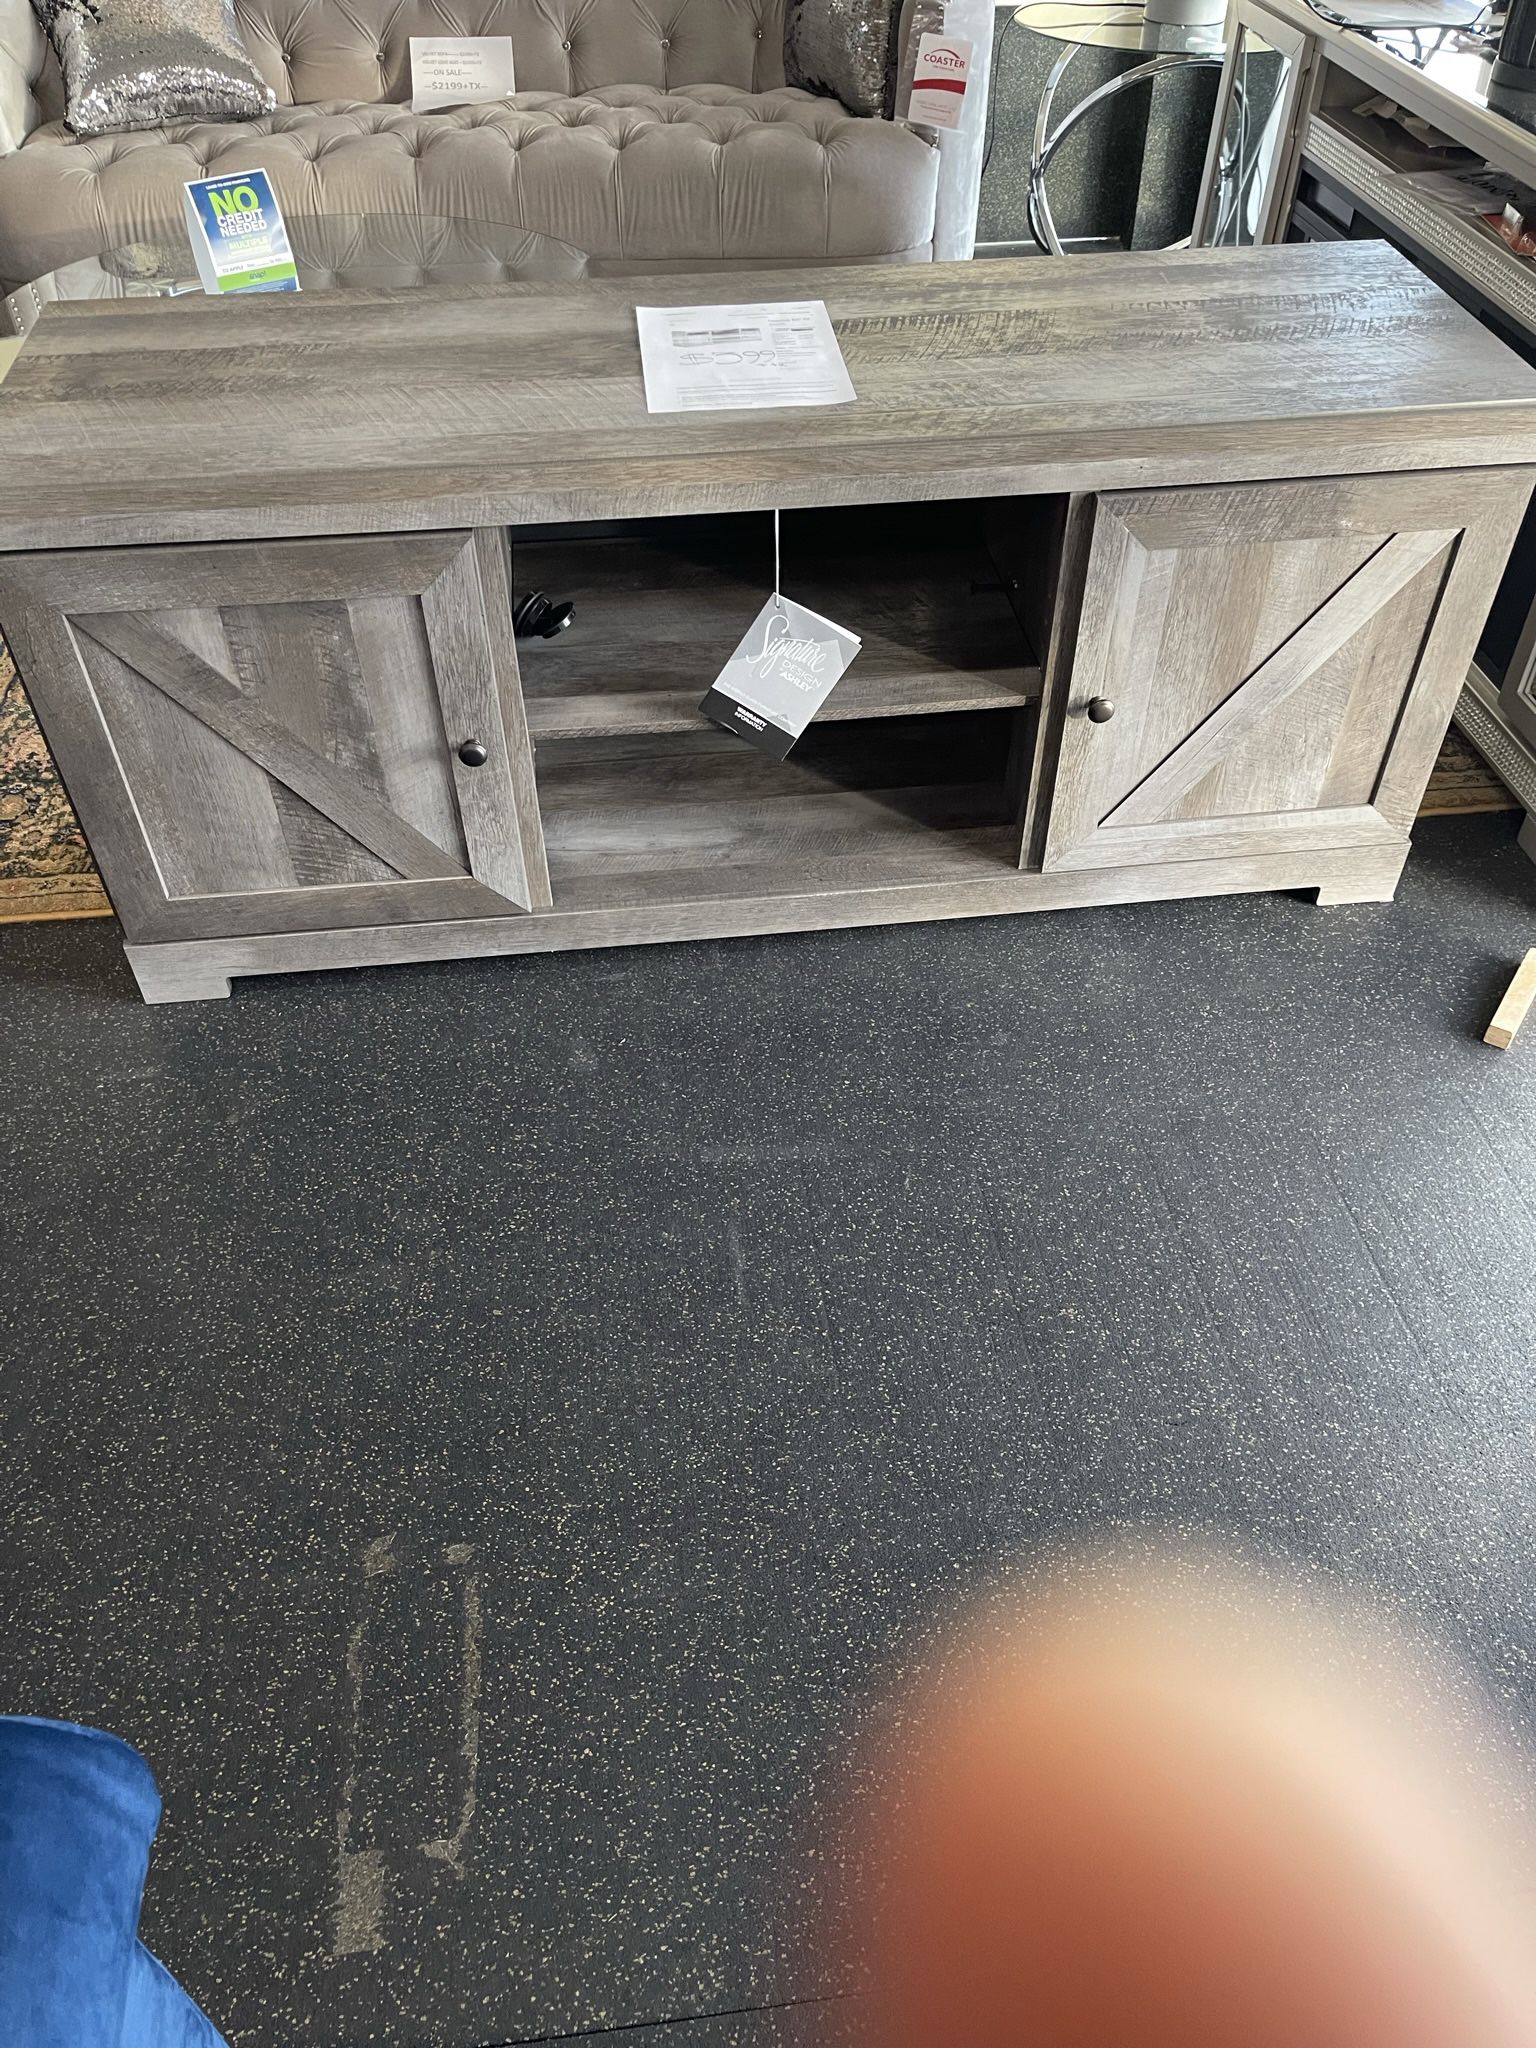 TV STAND ON SALE